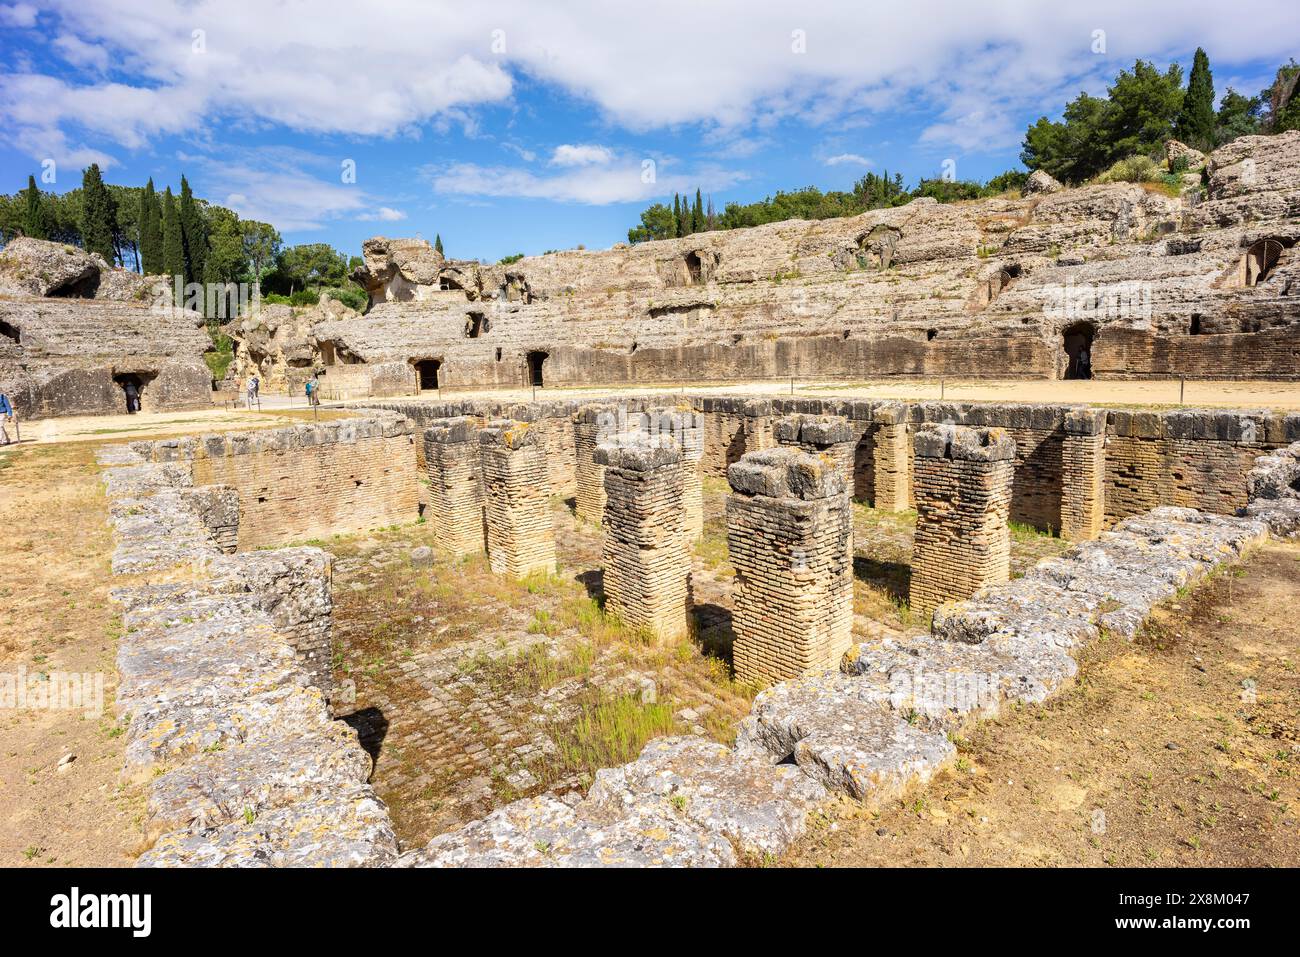 Italica amphitheater, time of Emperor Hadrian, years 117-138., Italica, ancient Roman city, 206 BC. ,Andalusia, Spain Stock Photo